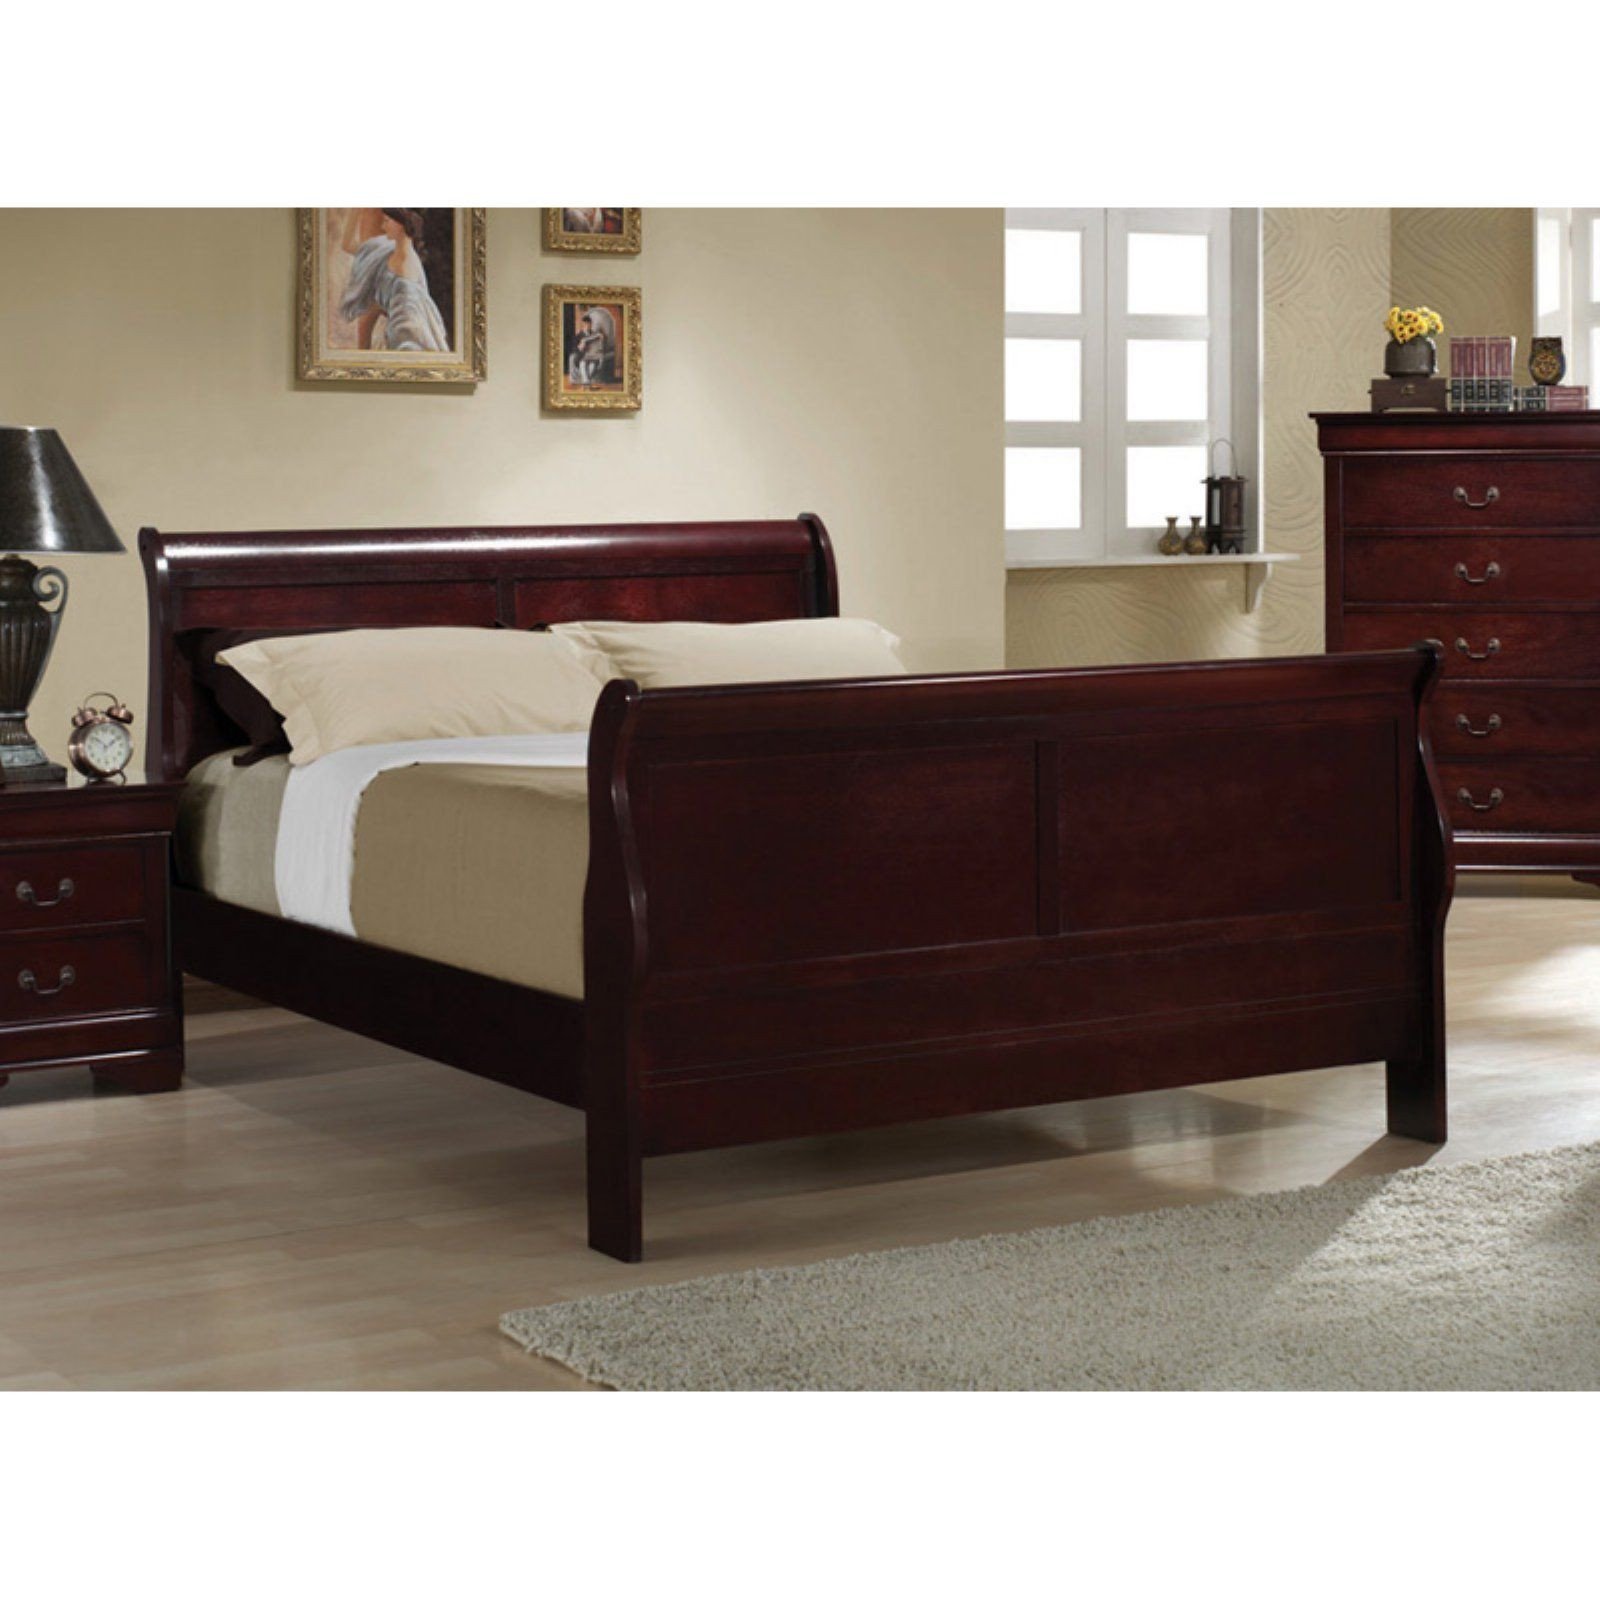 Louis Philippe Bedroom Set Lovely Coaster Furniture Louis Philippe Ii 2 Drawer Nightstand